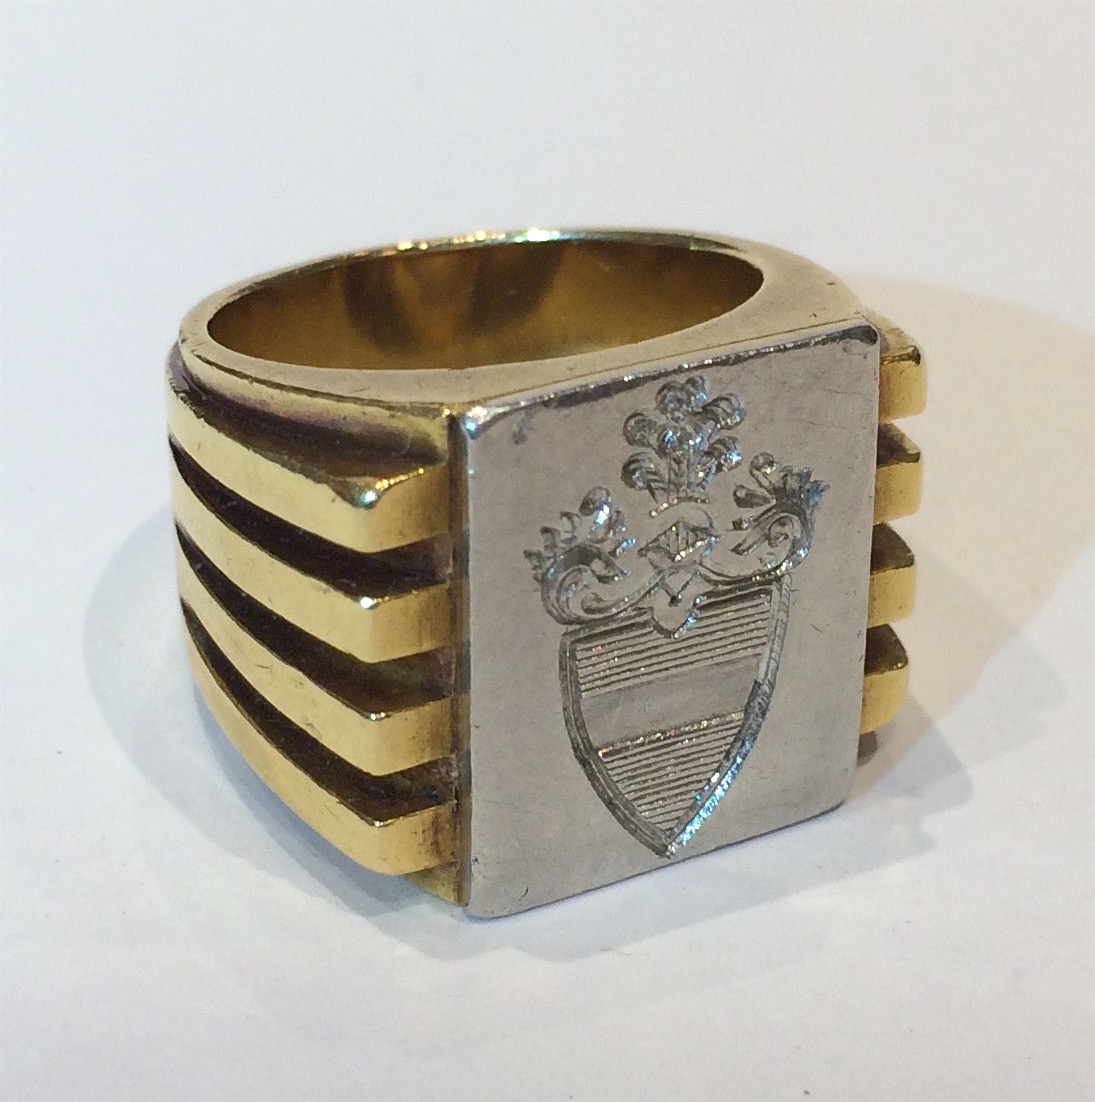 Van Cleef & Arpels, New York, Art Deco “Heraldic” ring in 18k gold with stylized geometric flanges on either side of the platinum rectangular plaque with an intaglio carved Coat of Arms, signed Van Cleef & Arpels, NY, 9398, c.1930